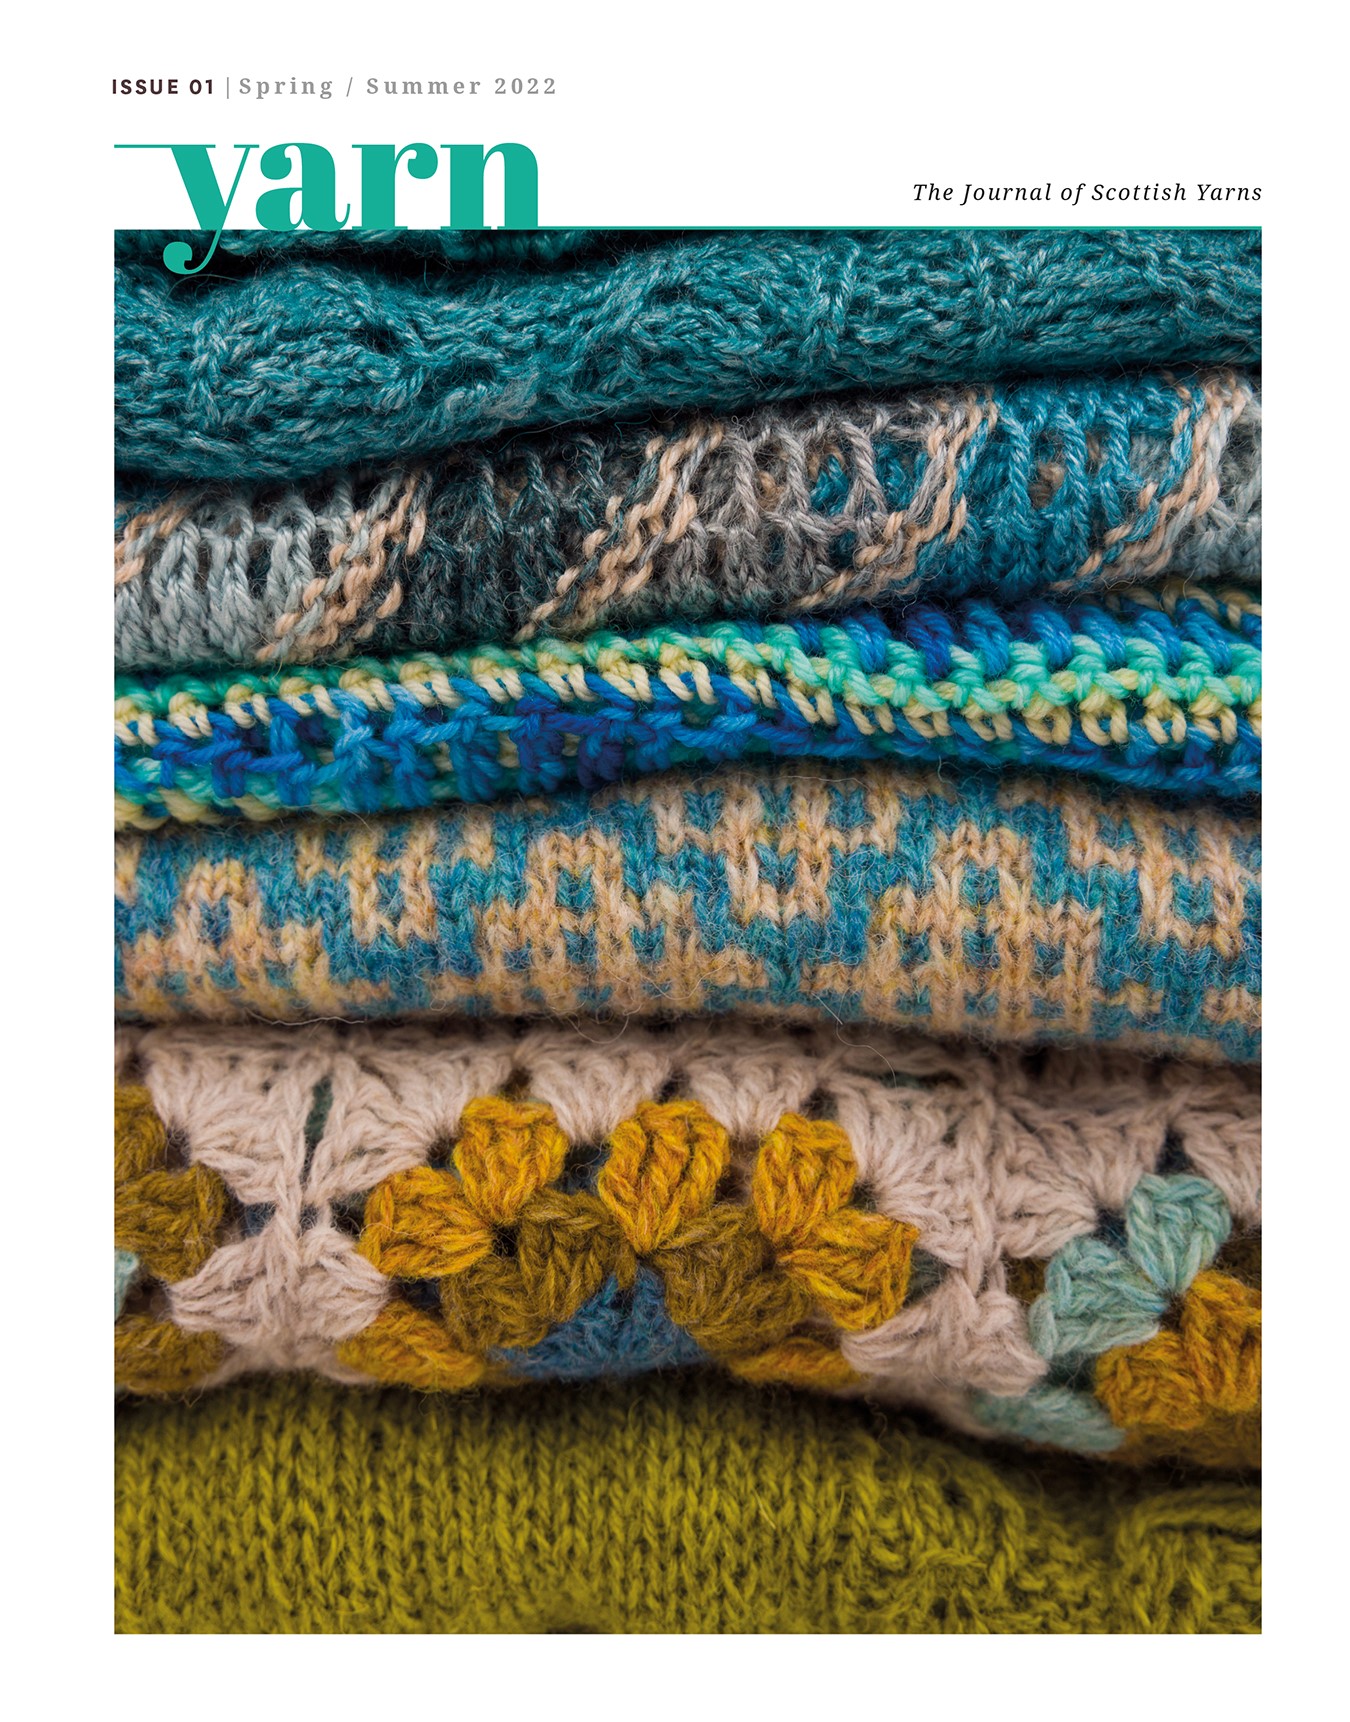 The Journal of Scottish Yarns Issue 1 Spring/Summer 2022